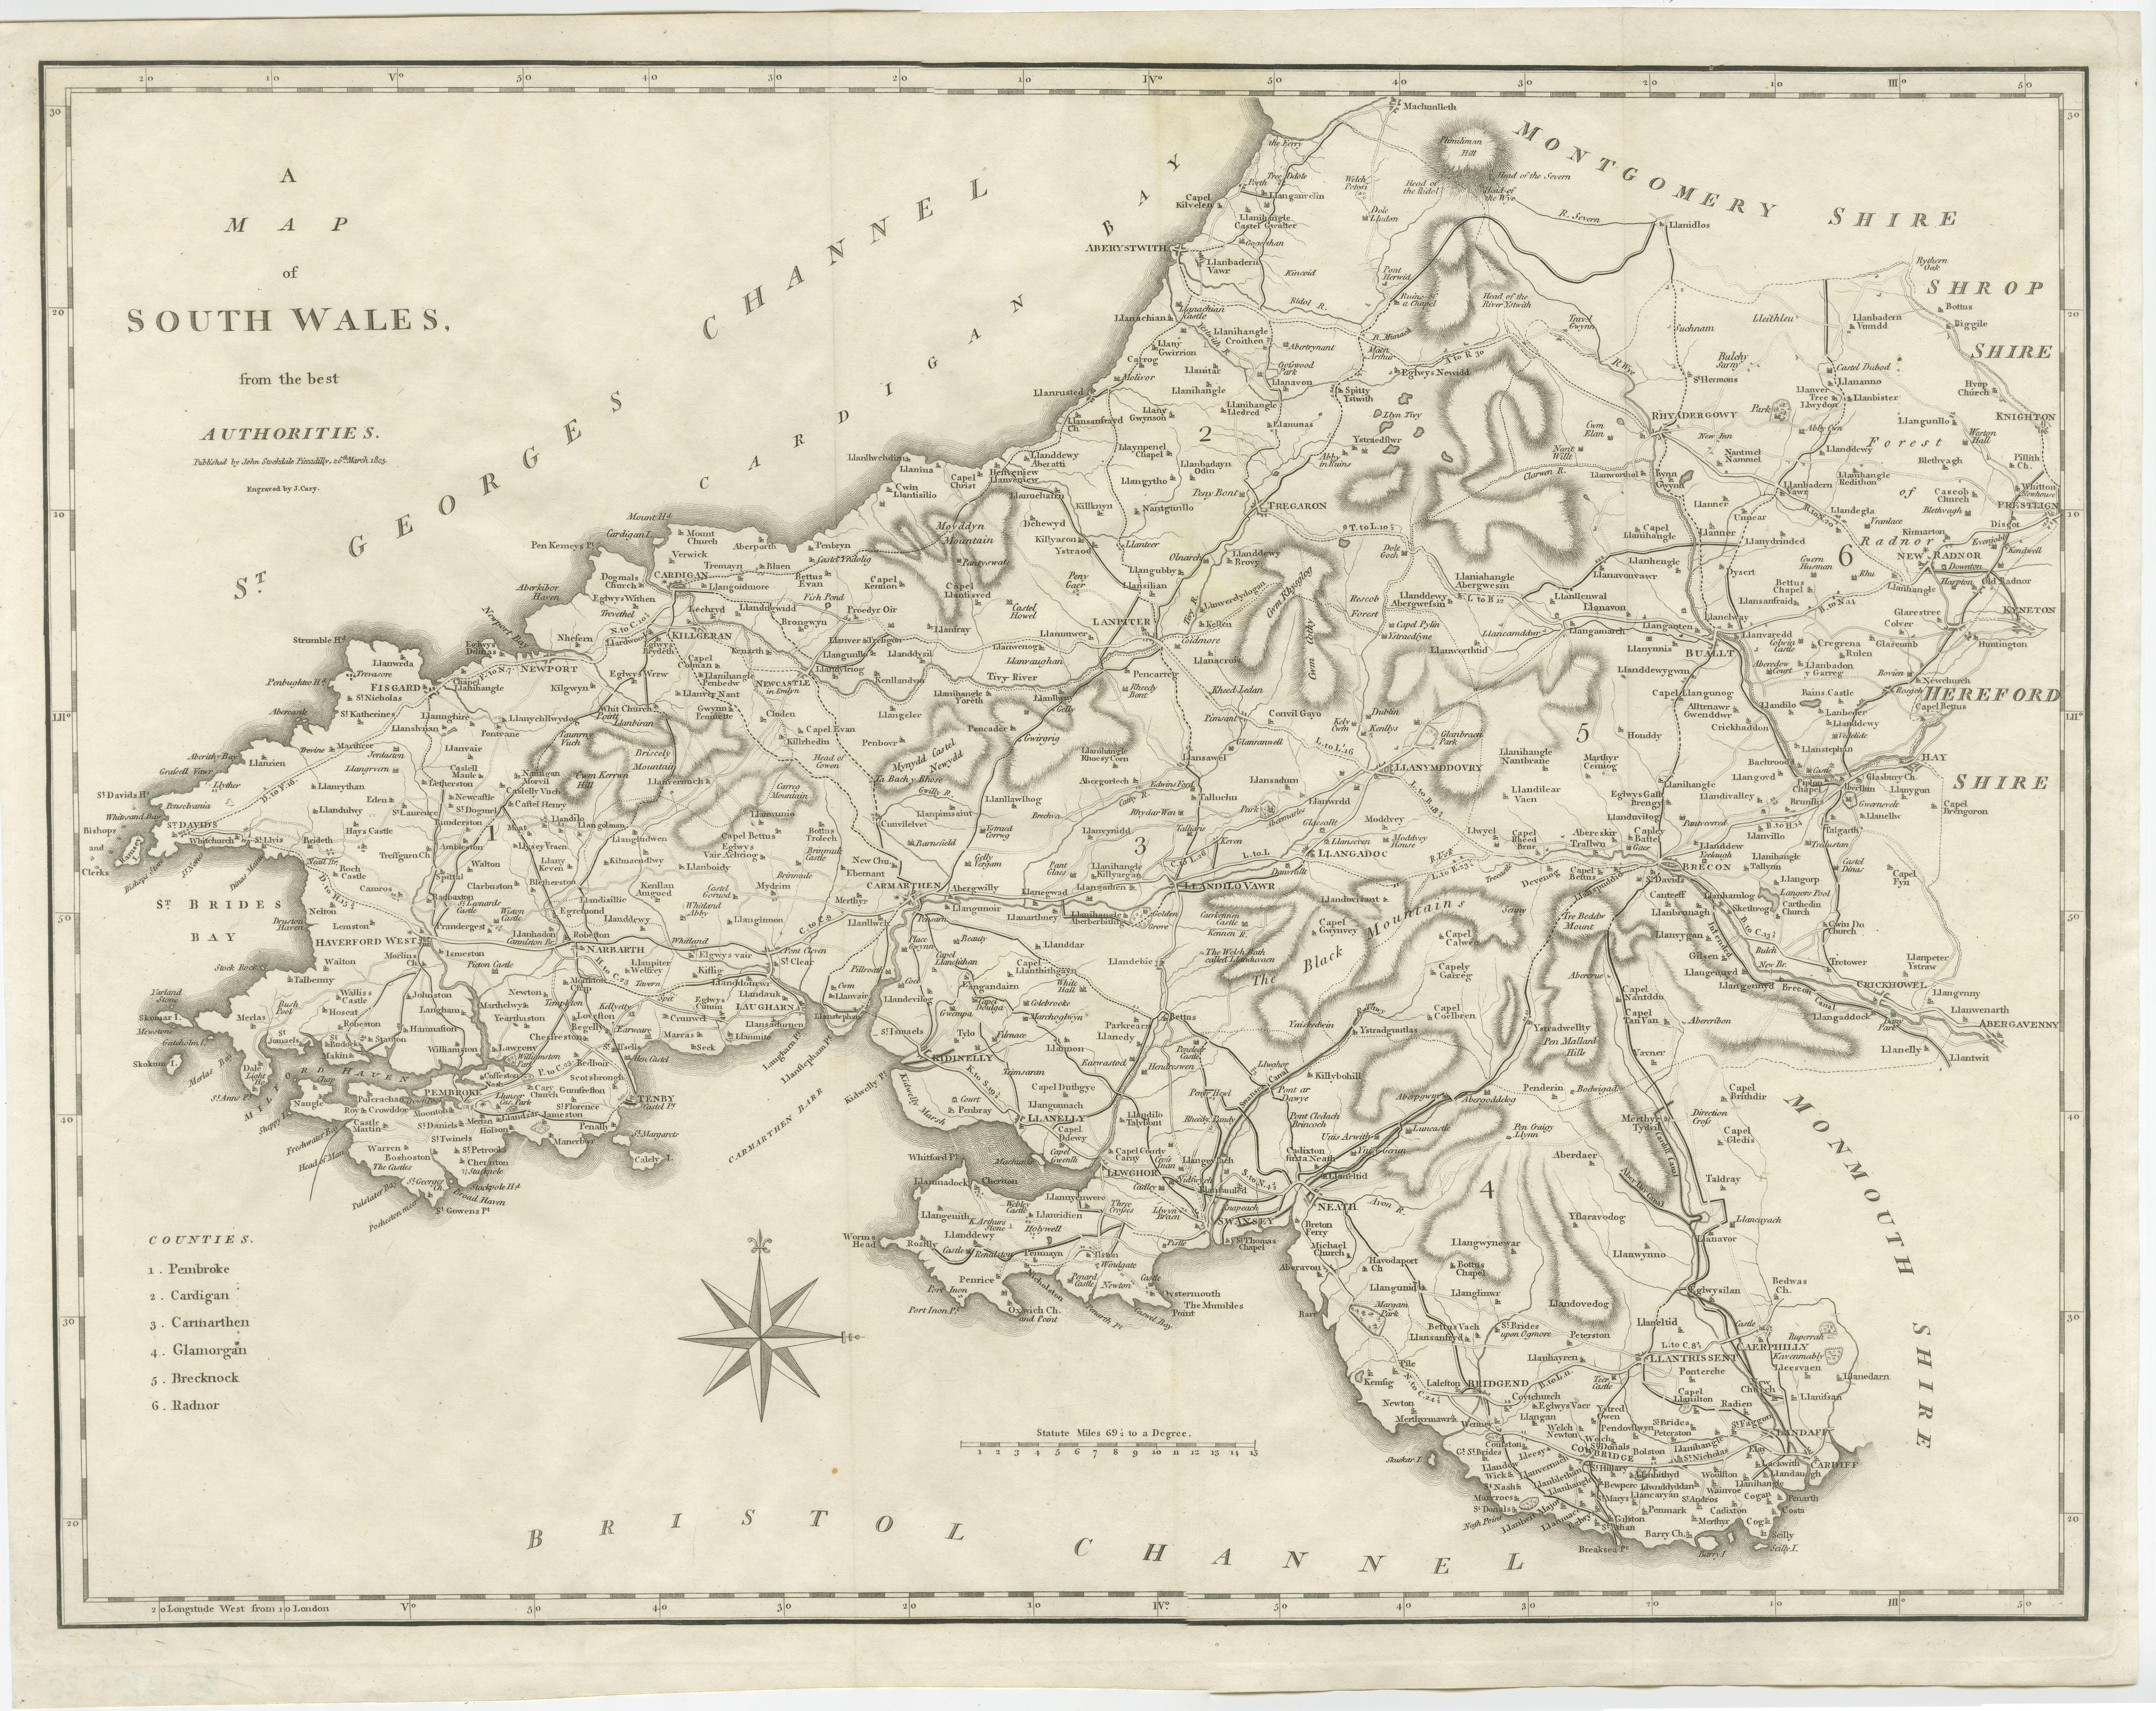 Antique map titled 'A Map of South Wales from the best Authorities'. Original old county map of South Wales, England. Engraved by John Cary. Originates from 'New British Atlas' by John Stockdale, published 1805. 

John Cary (1755-1835) was a